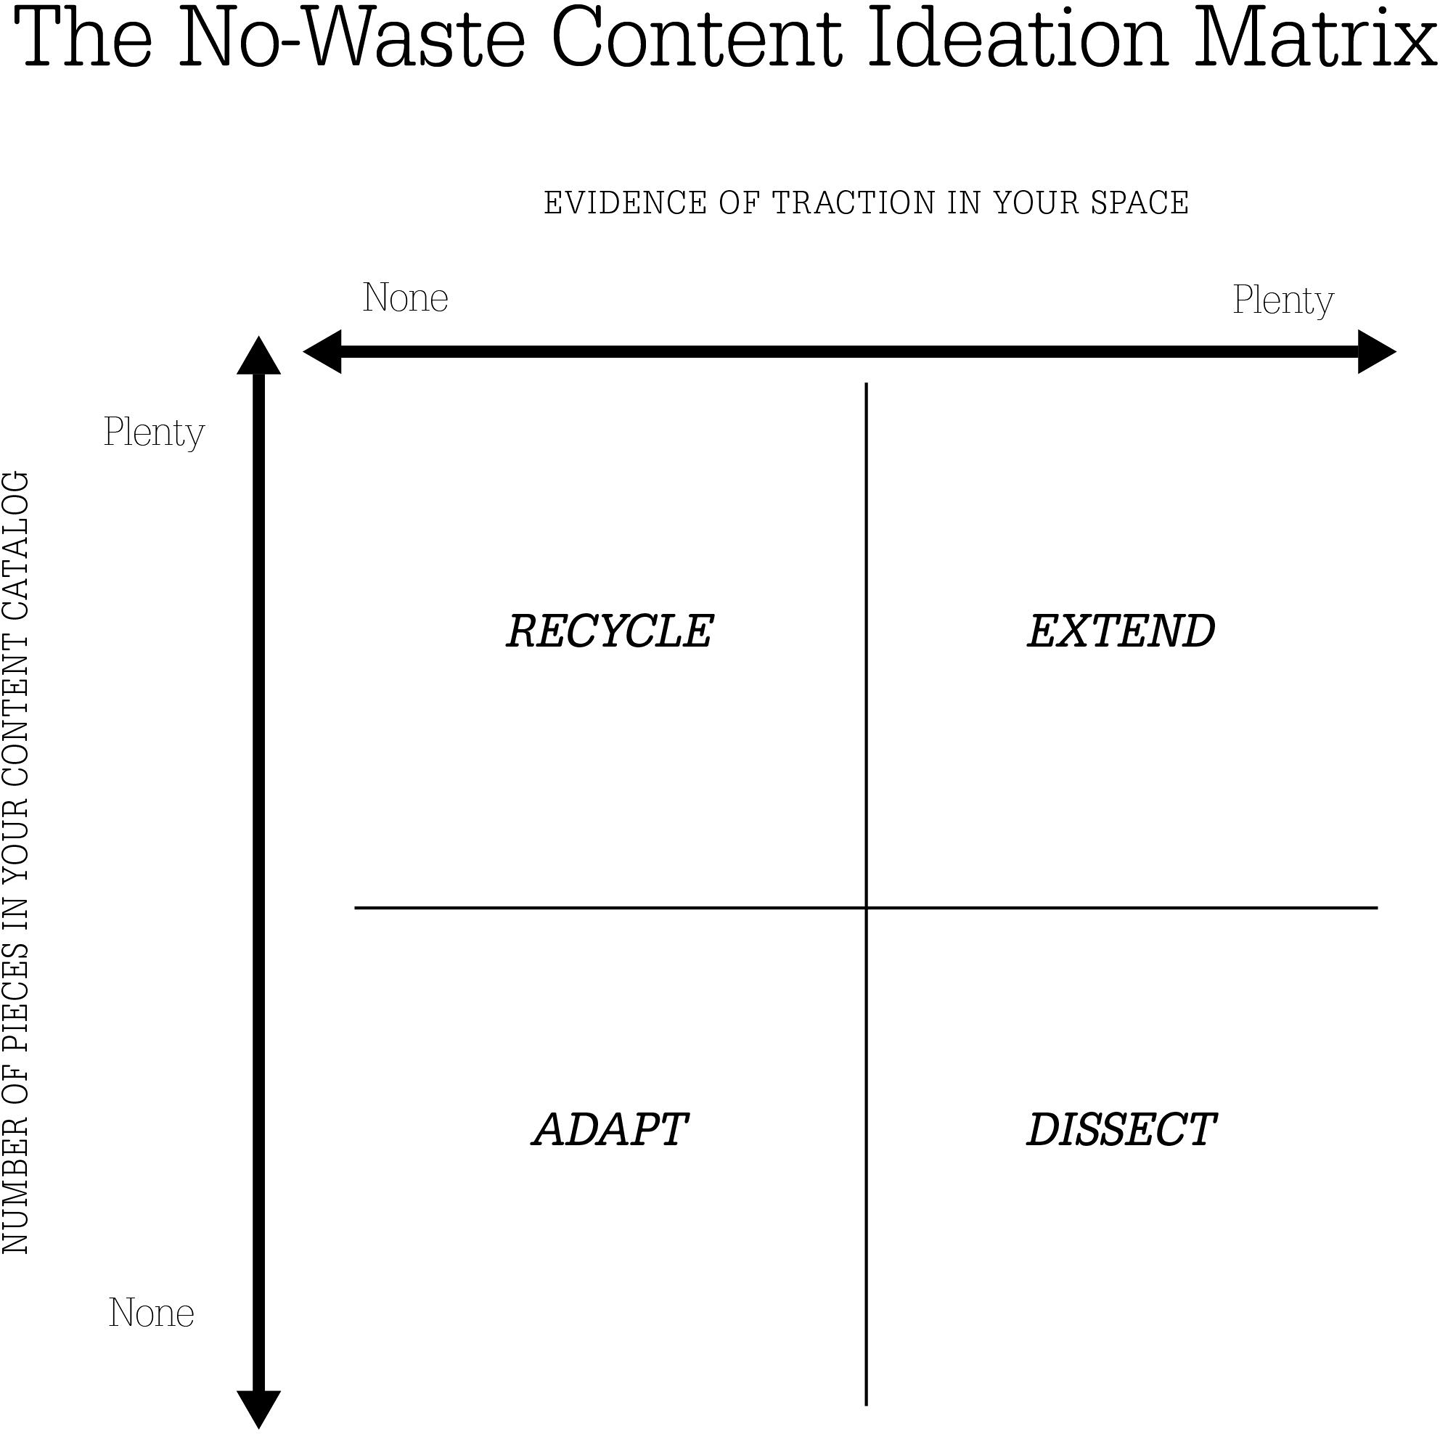 The No-Waste Content Ideation Matrix